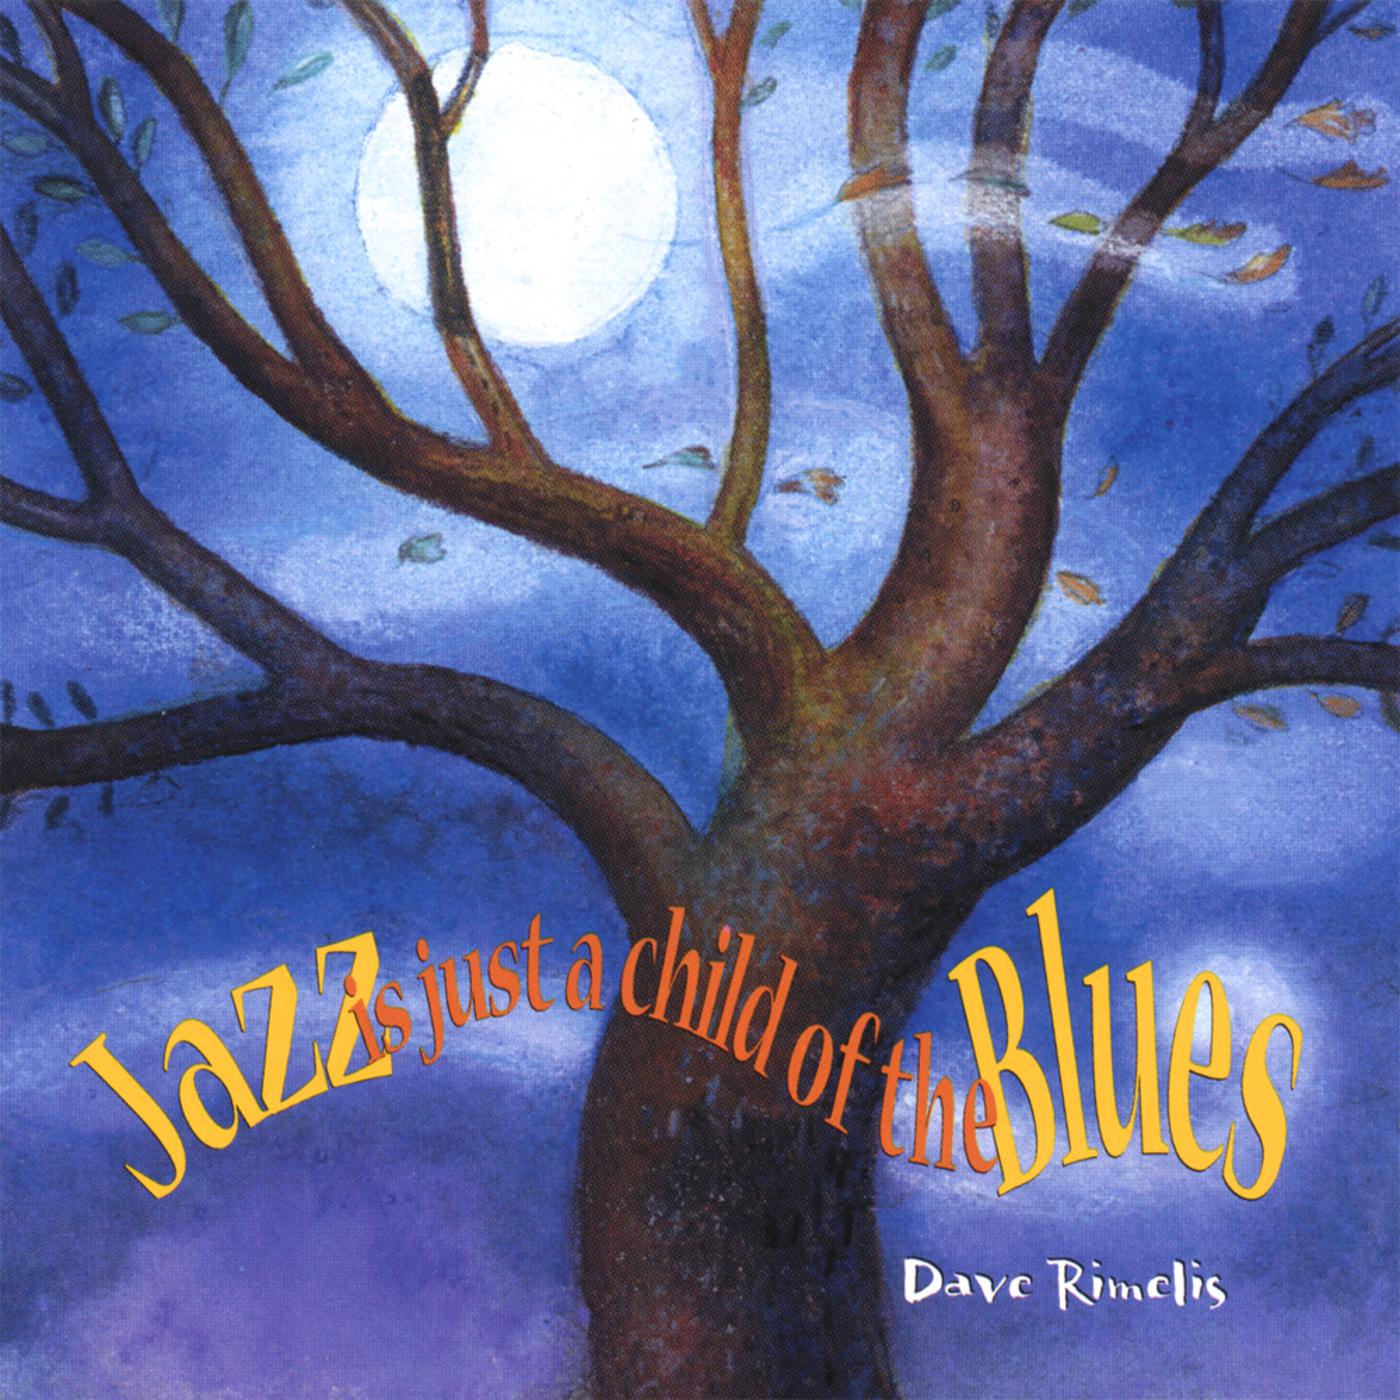 Dave Rimelis - Jazz is Just A Child Of The Blues